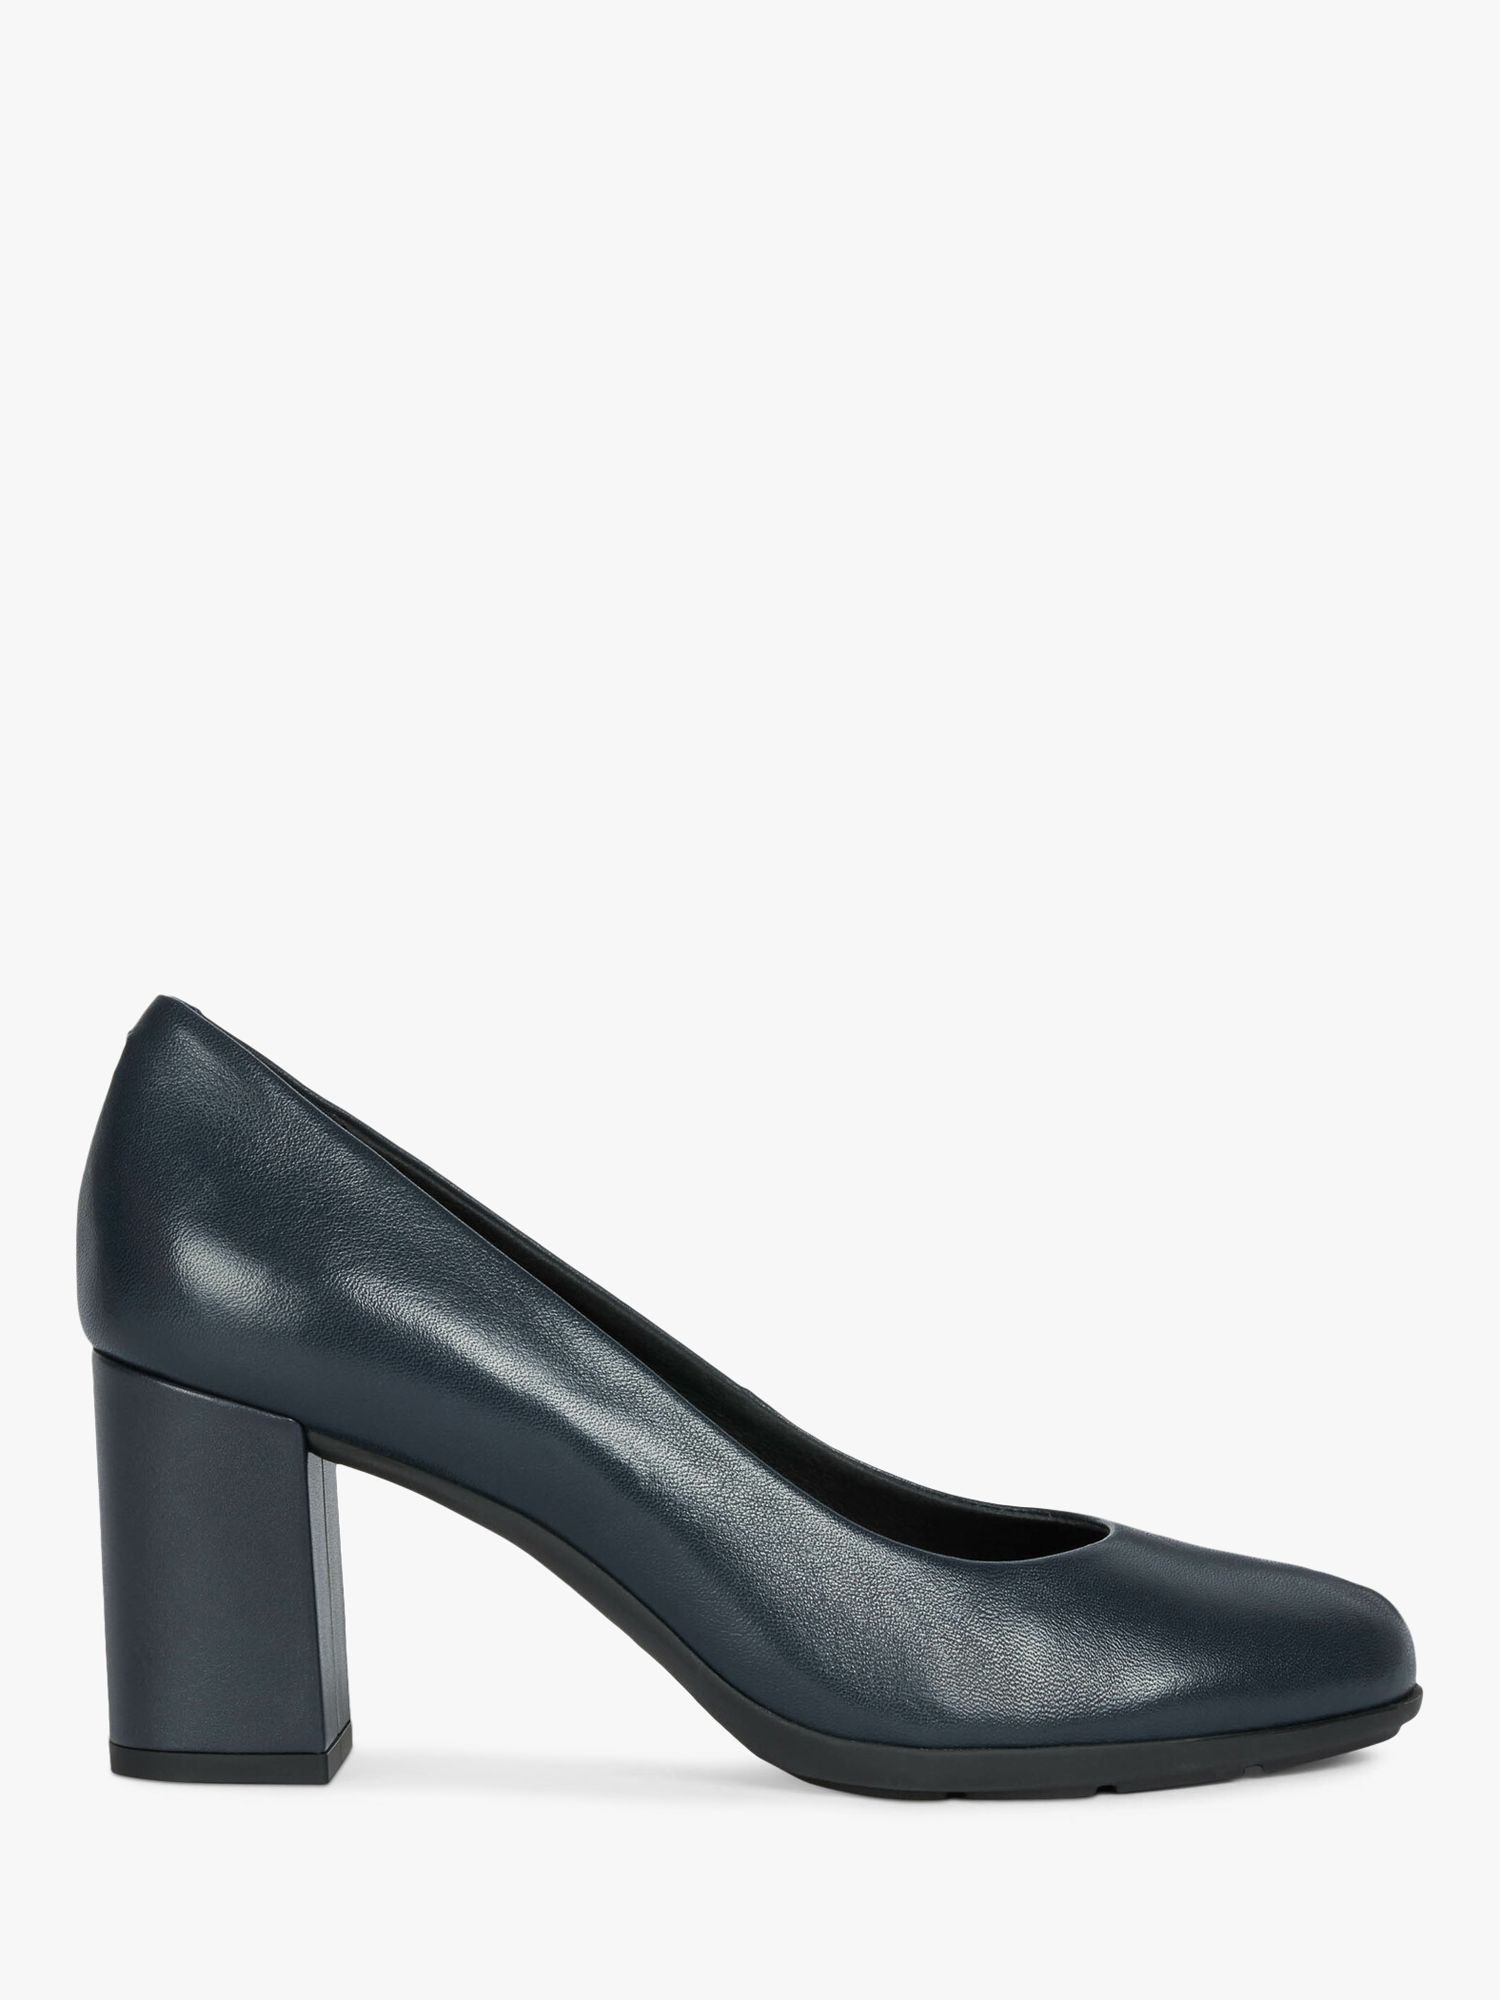 leather block heel court shoes